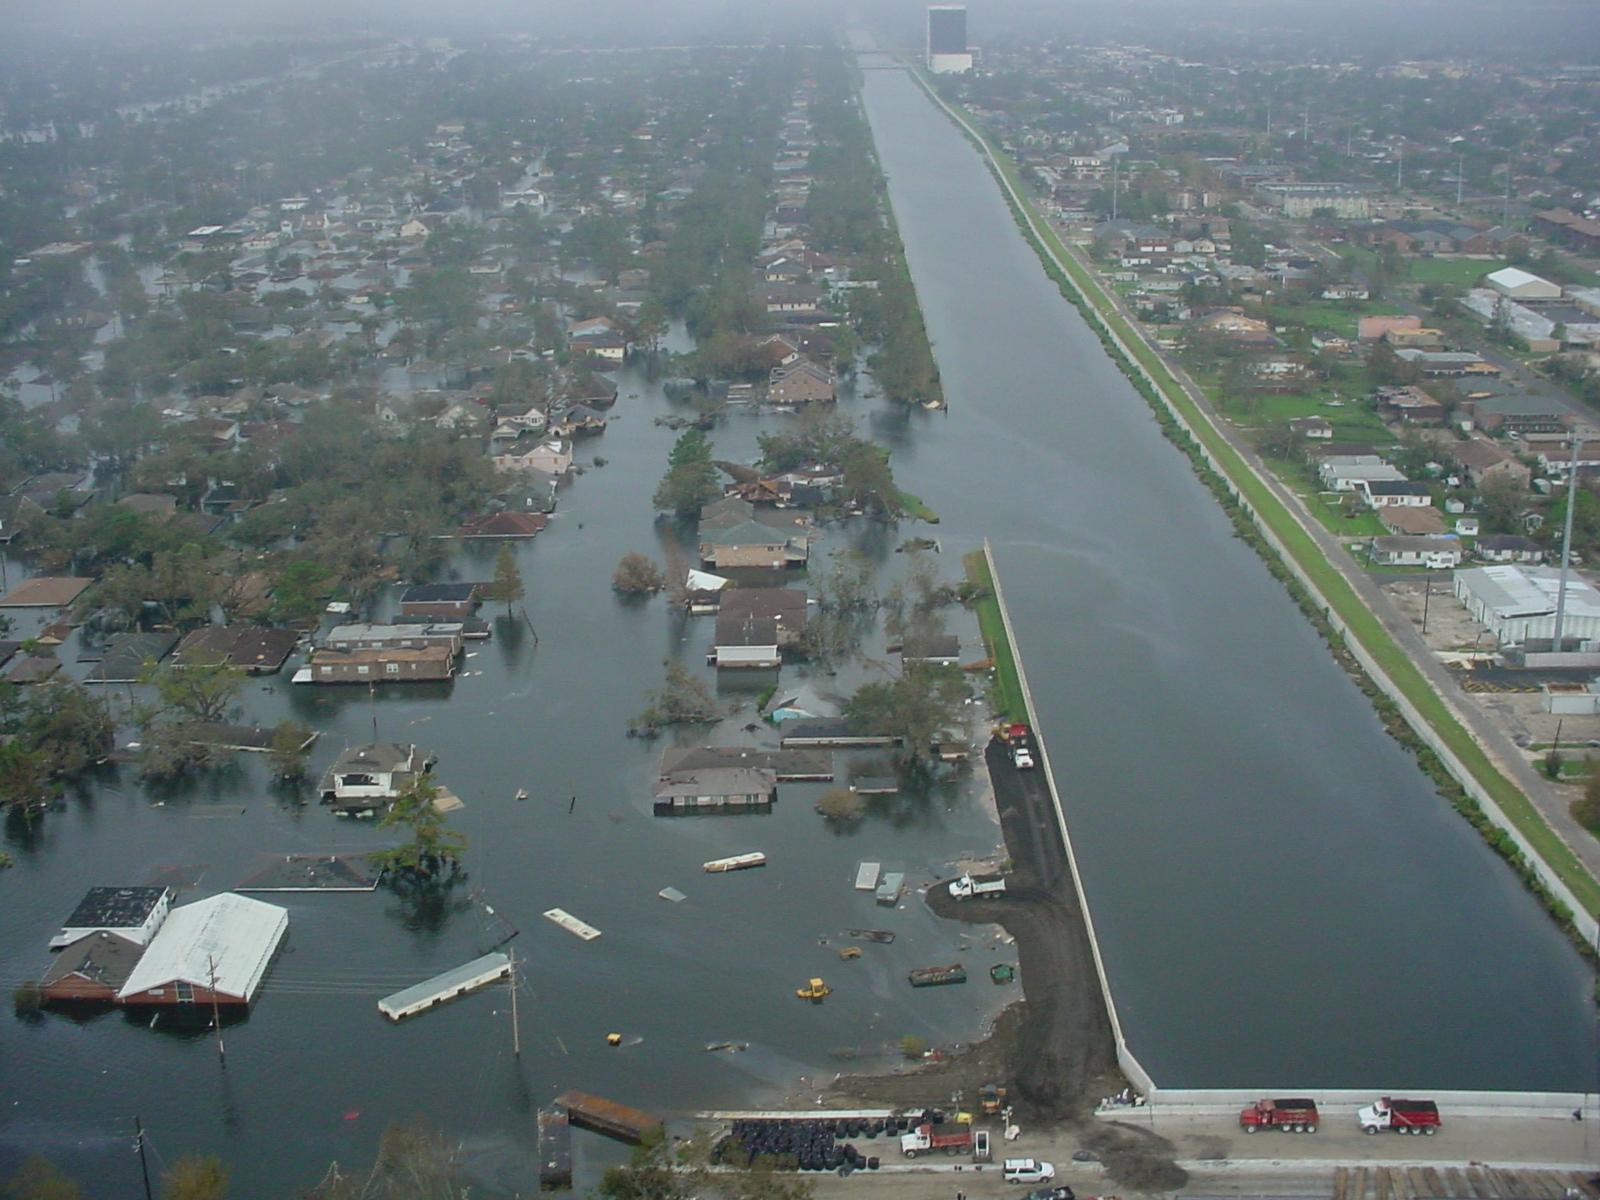 The 17th Street Canal breach in New Orleans after Hurricane Katrina